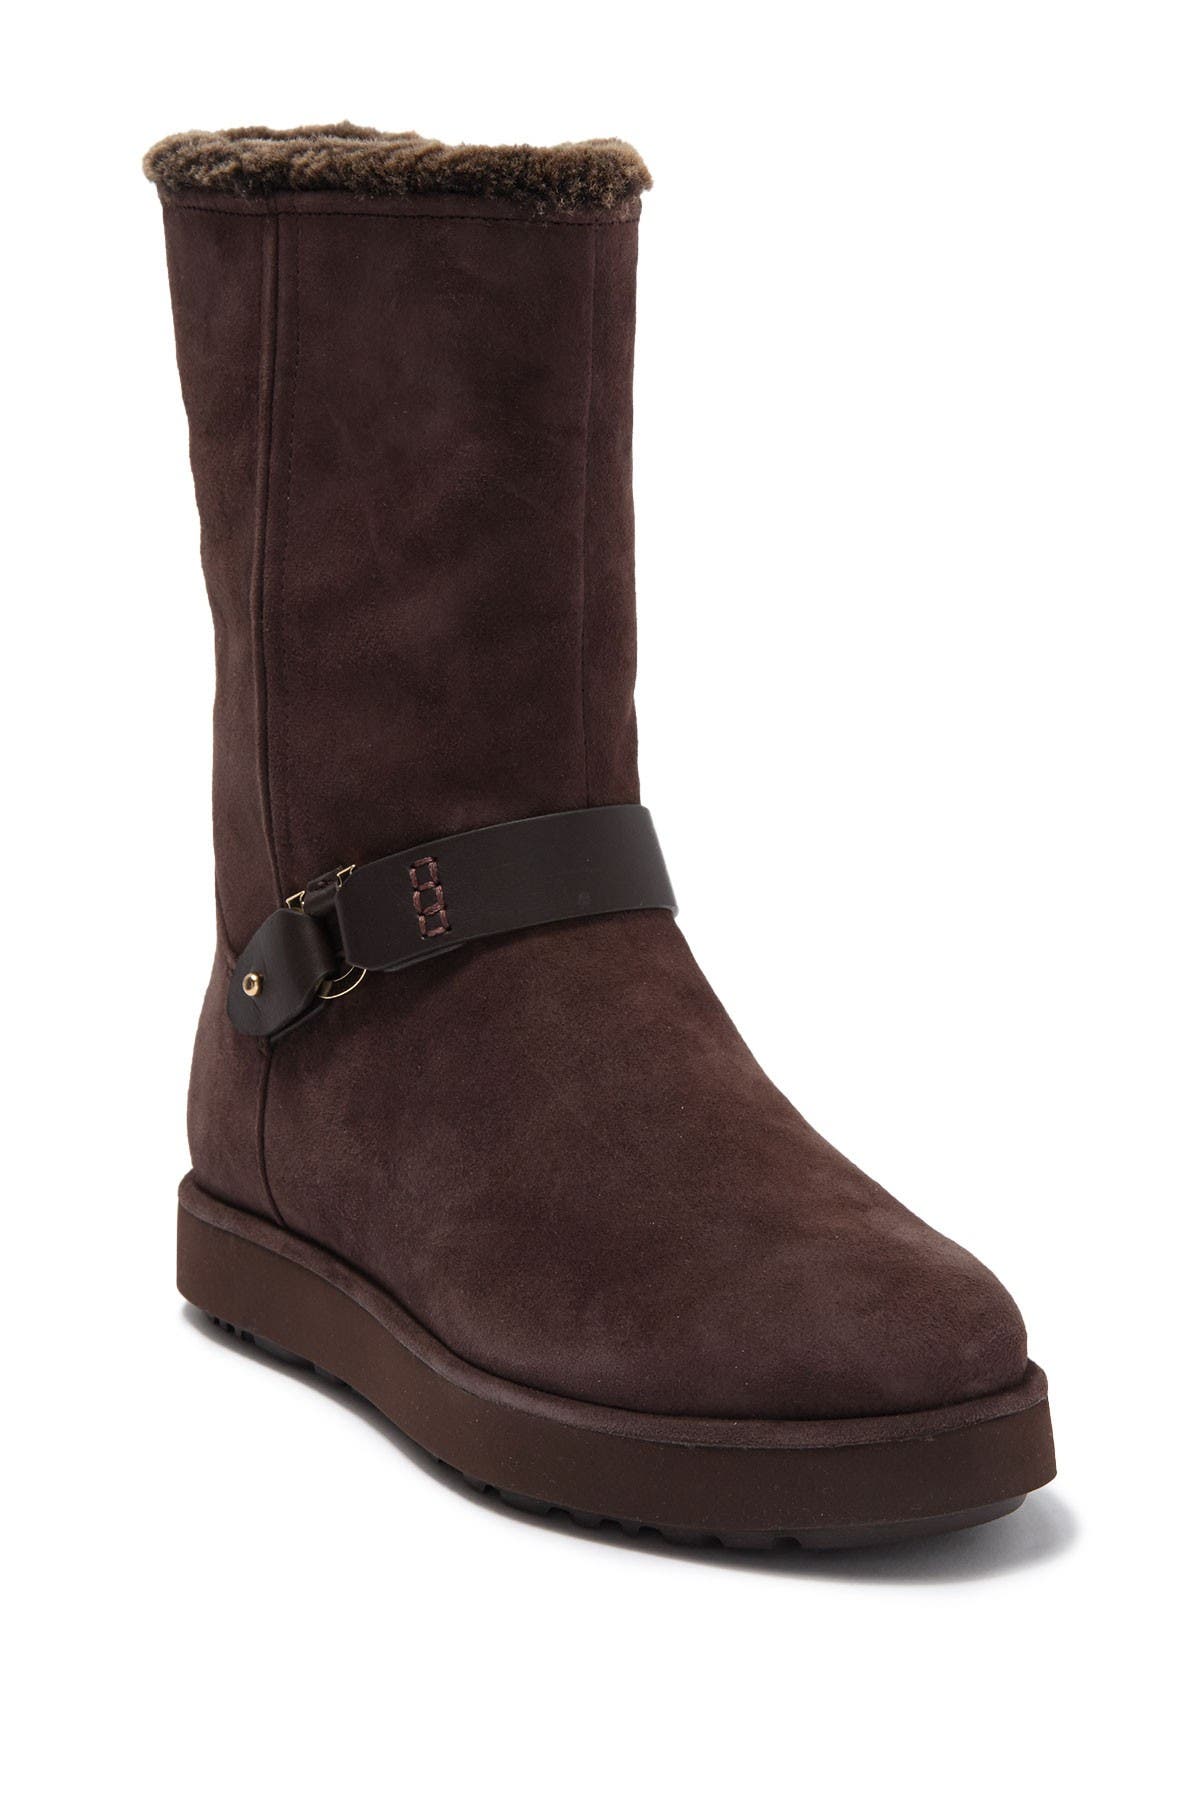 ugg shearling lined boots